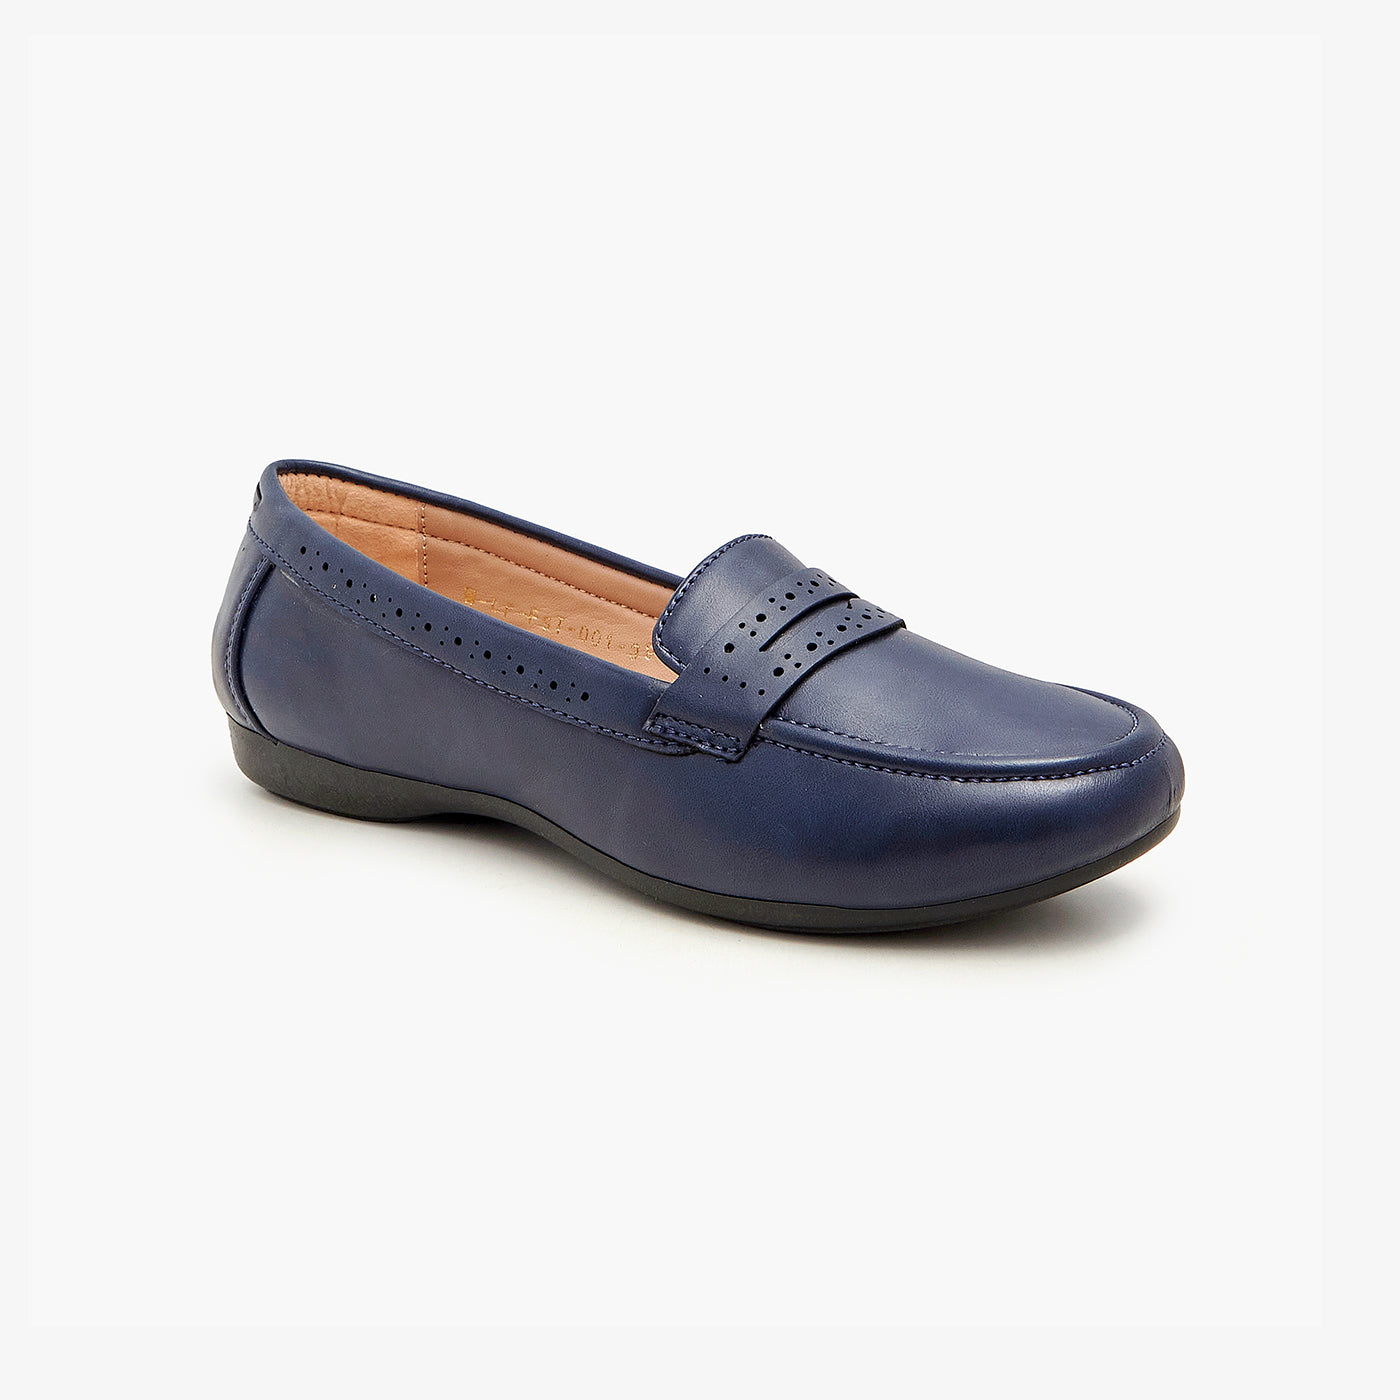 Casual Flat Medical Shoes For Women - Navy